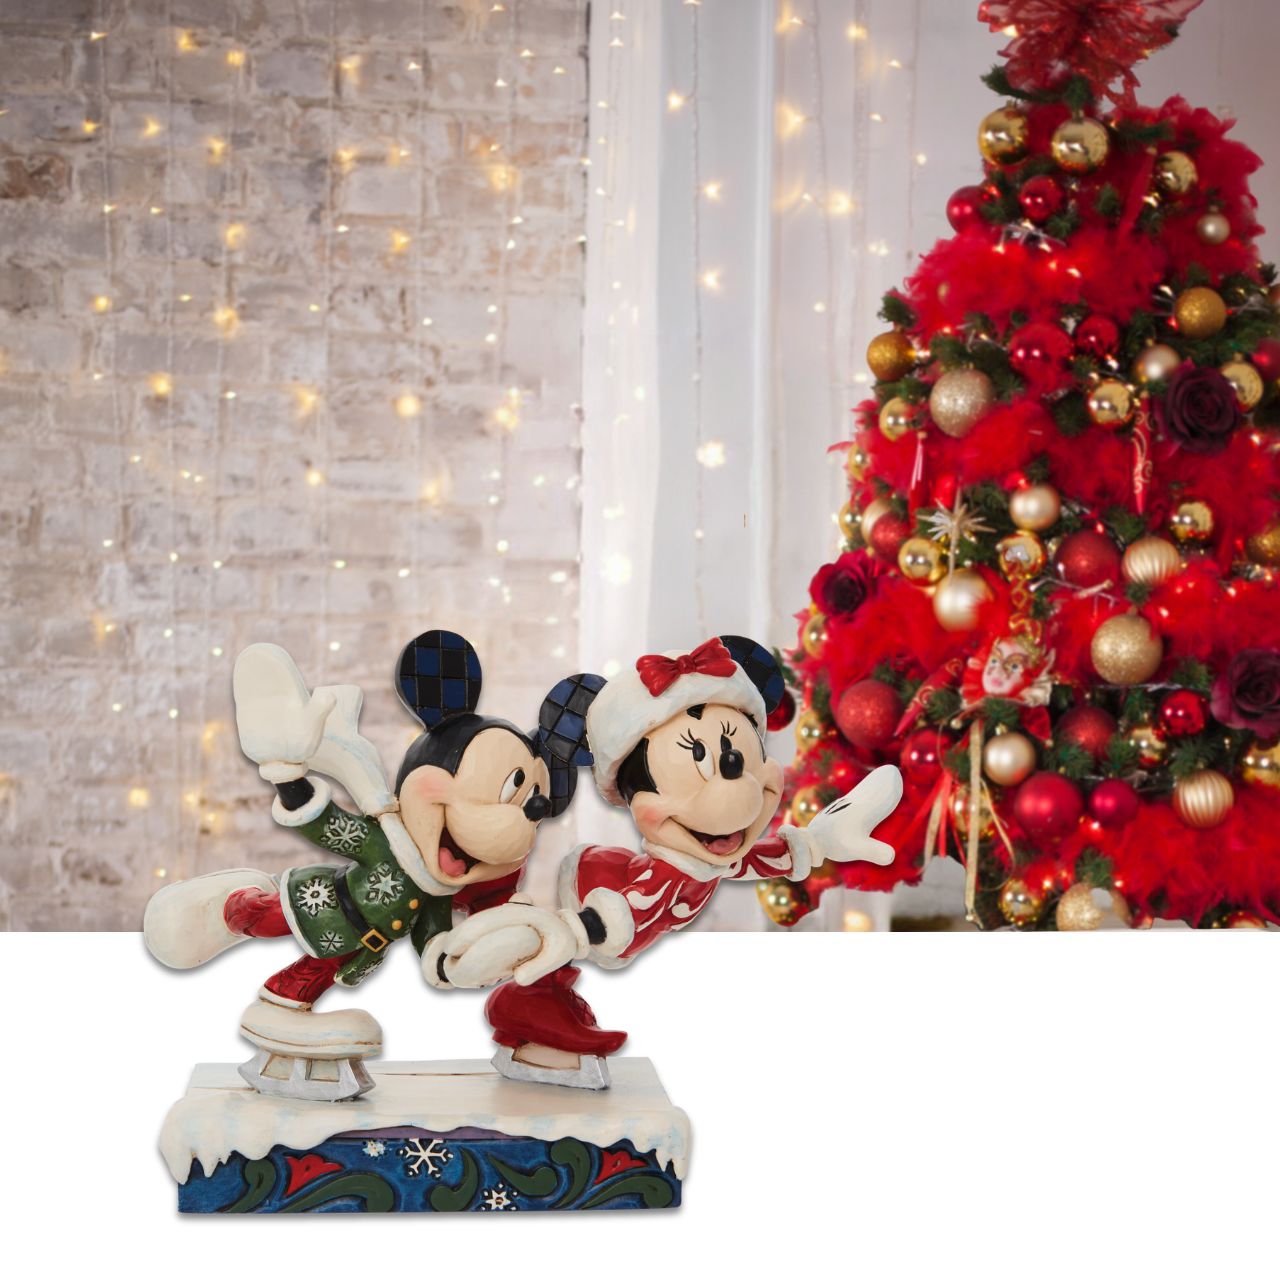 Disney Mickey and Minnie Ice Skating Figurine  Skating together, Mickey and Minnie Mouse warm the winter with their timeless love story. Hand in hand the pair enjoy each other's company in stunning snowflake tunics in this Jim Shore creation.